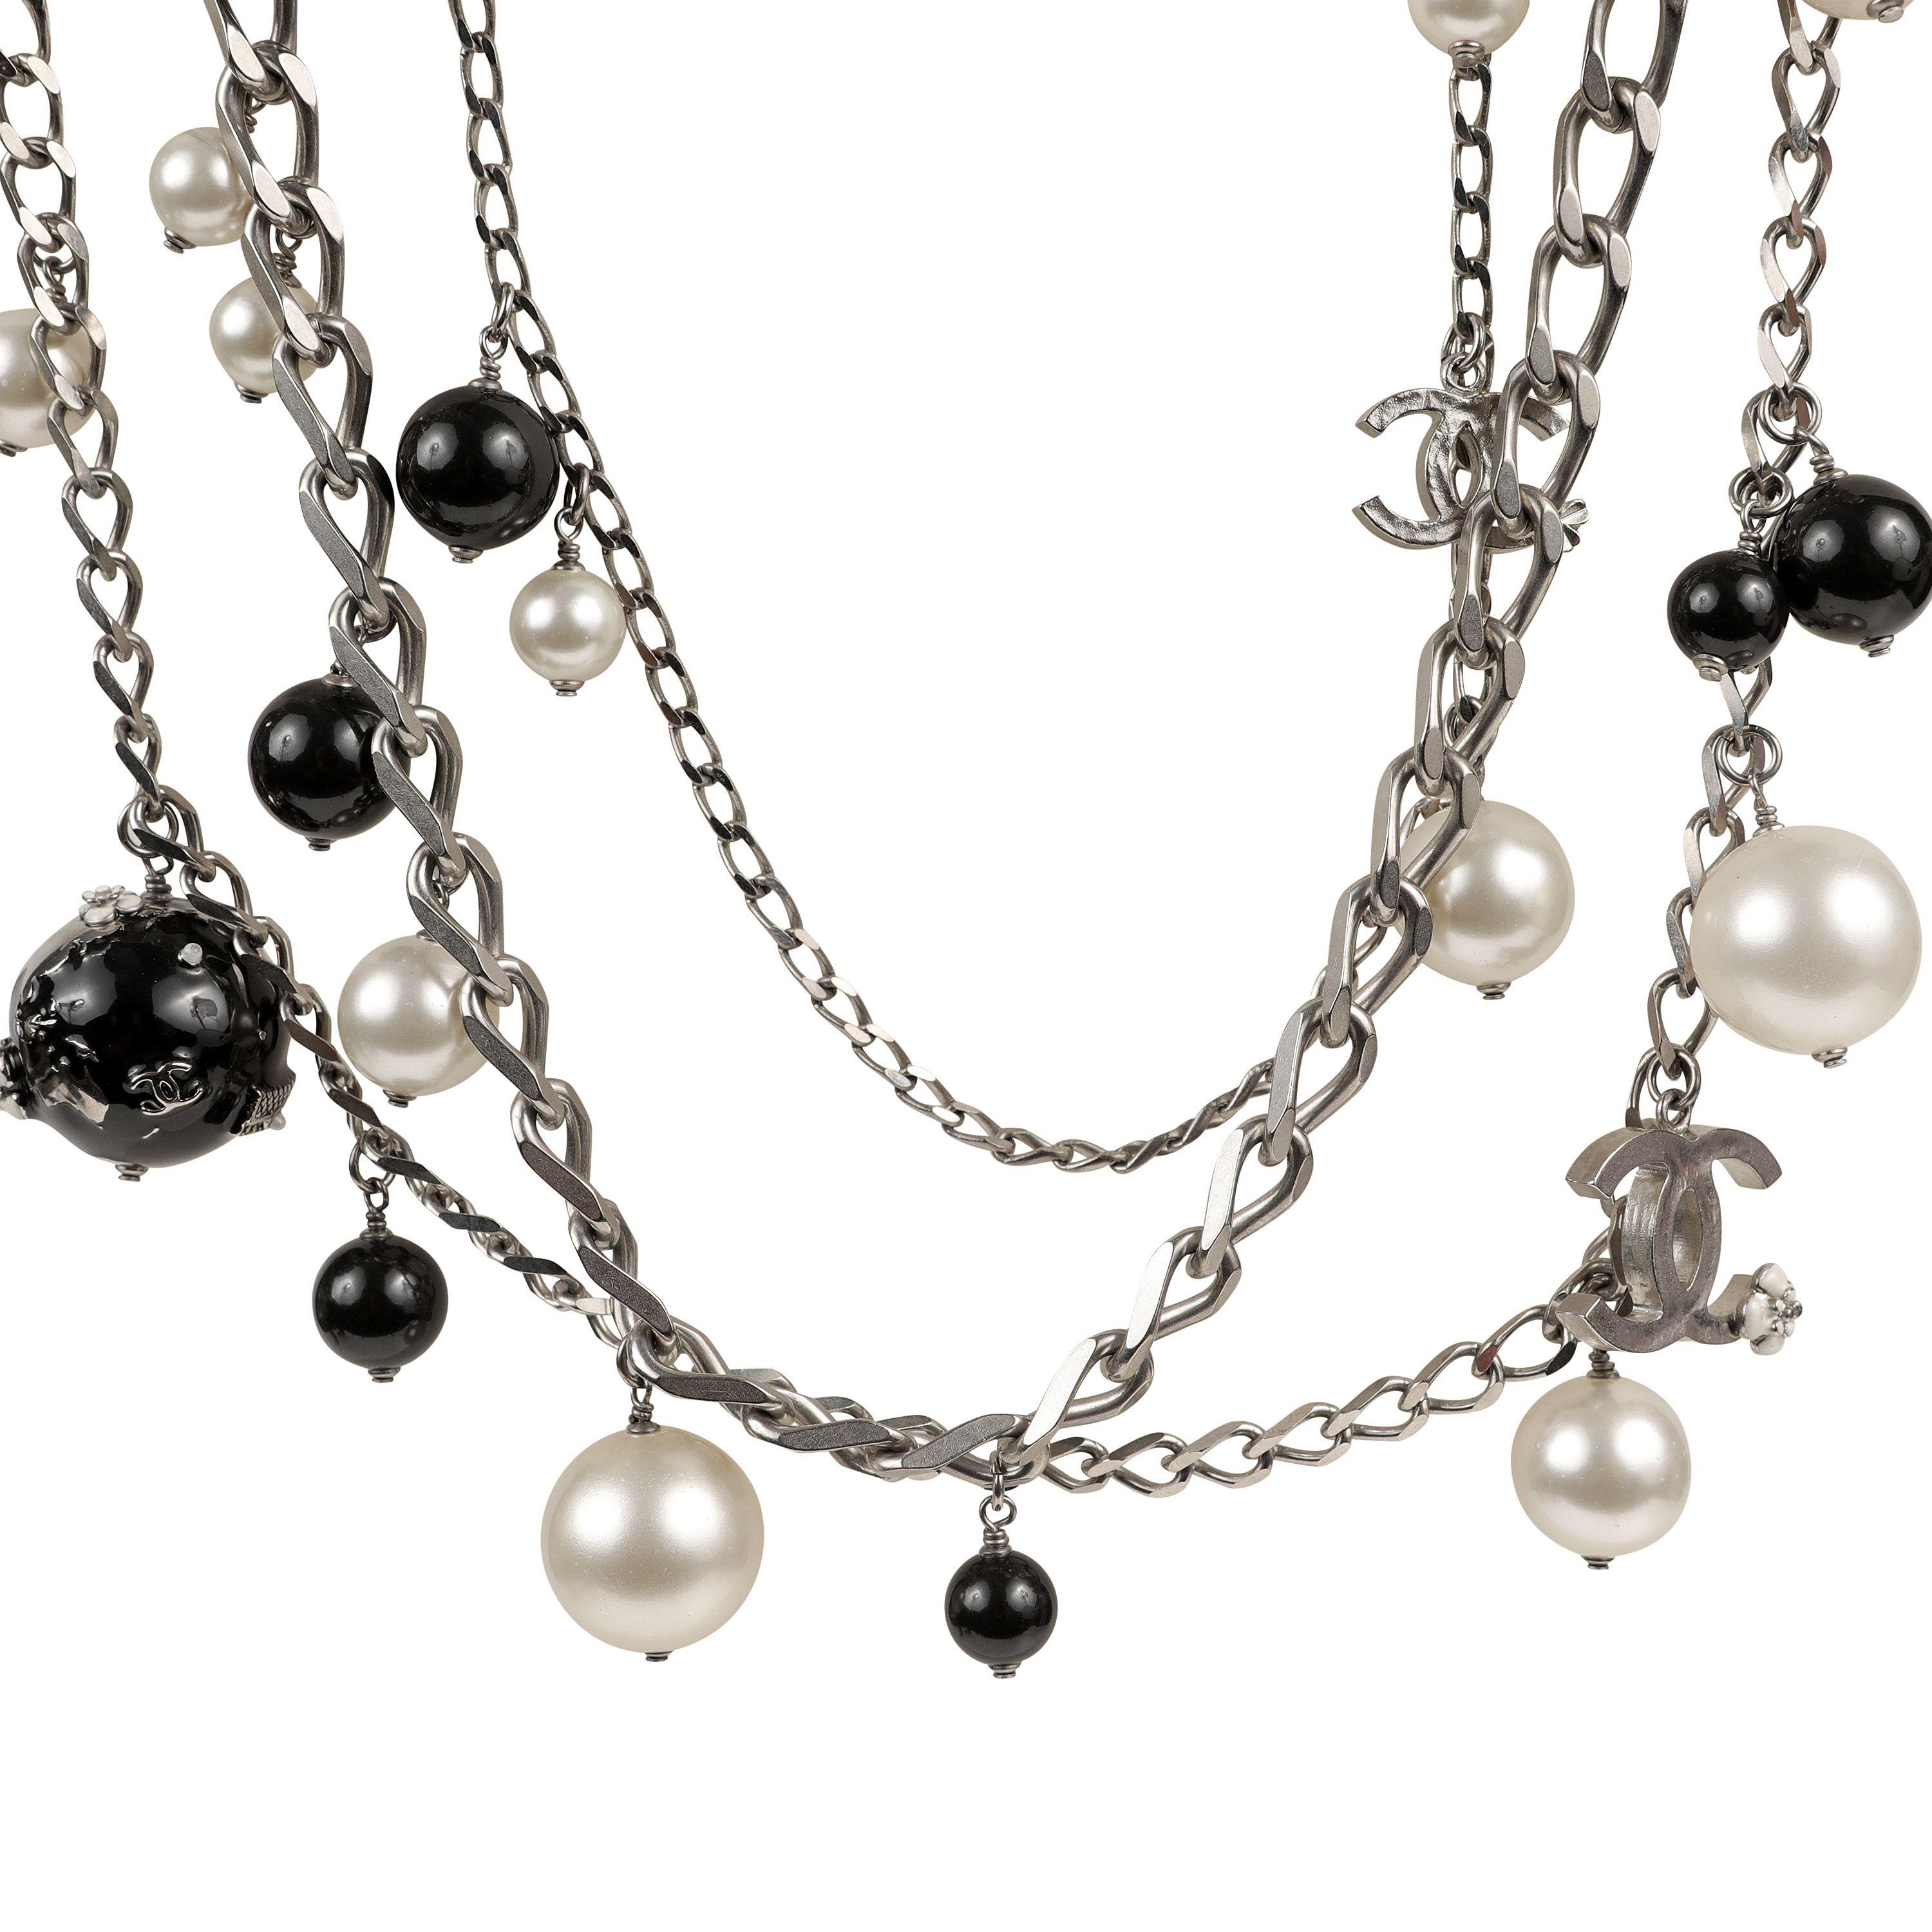 This authentic Chanel Silver Beaded Pearl Charm Necklace Belt is in excellent condition.  Triple layer of silver chains with dangling faux pearls, CC charms, black beads and flower applique globes.   Adjustable length with dangling CC charm.  Pouch